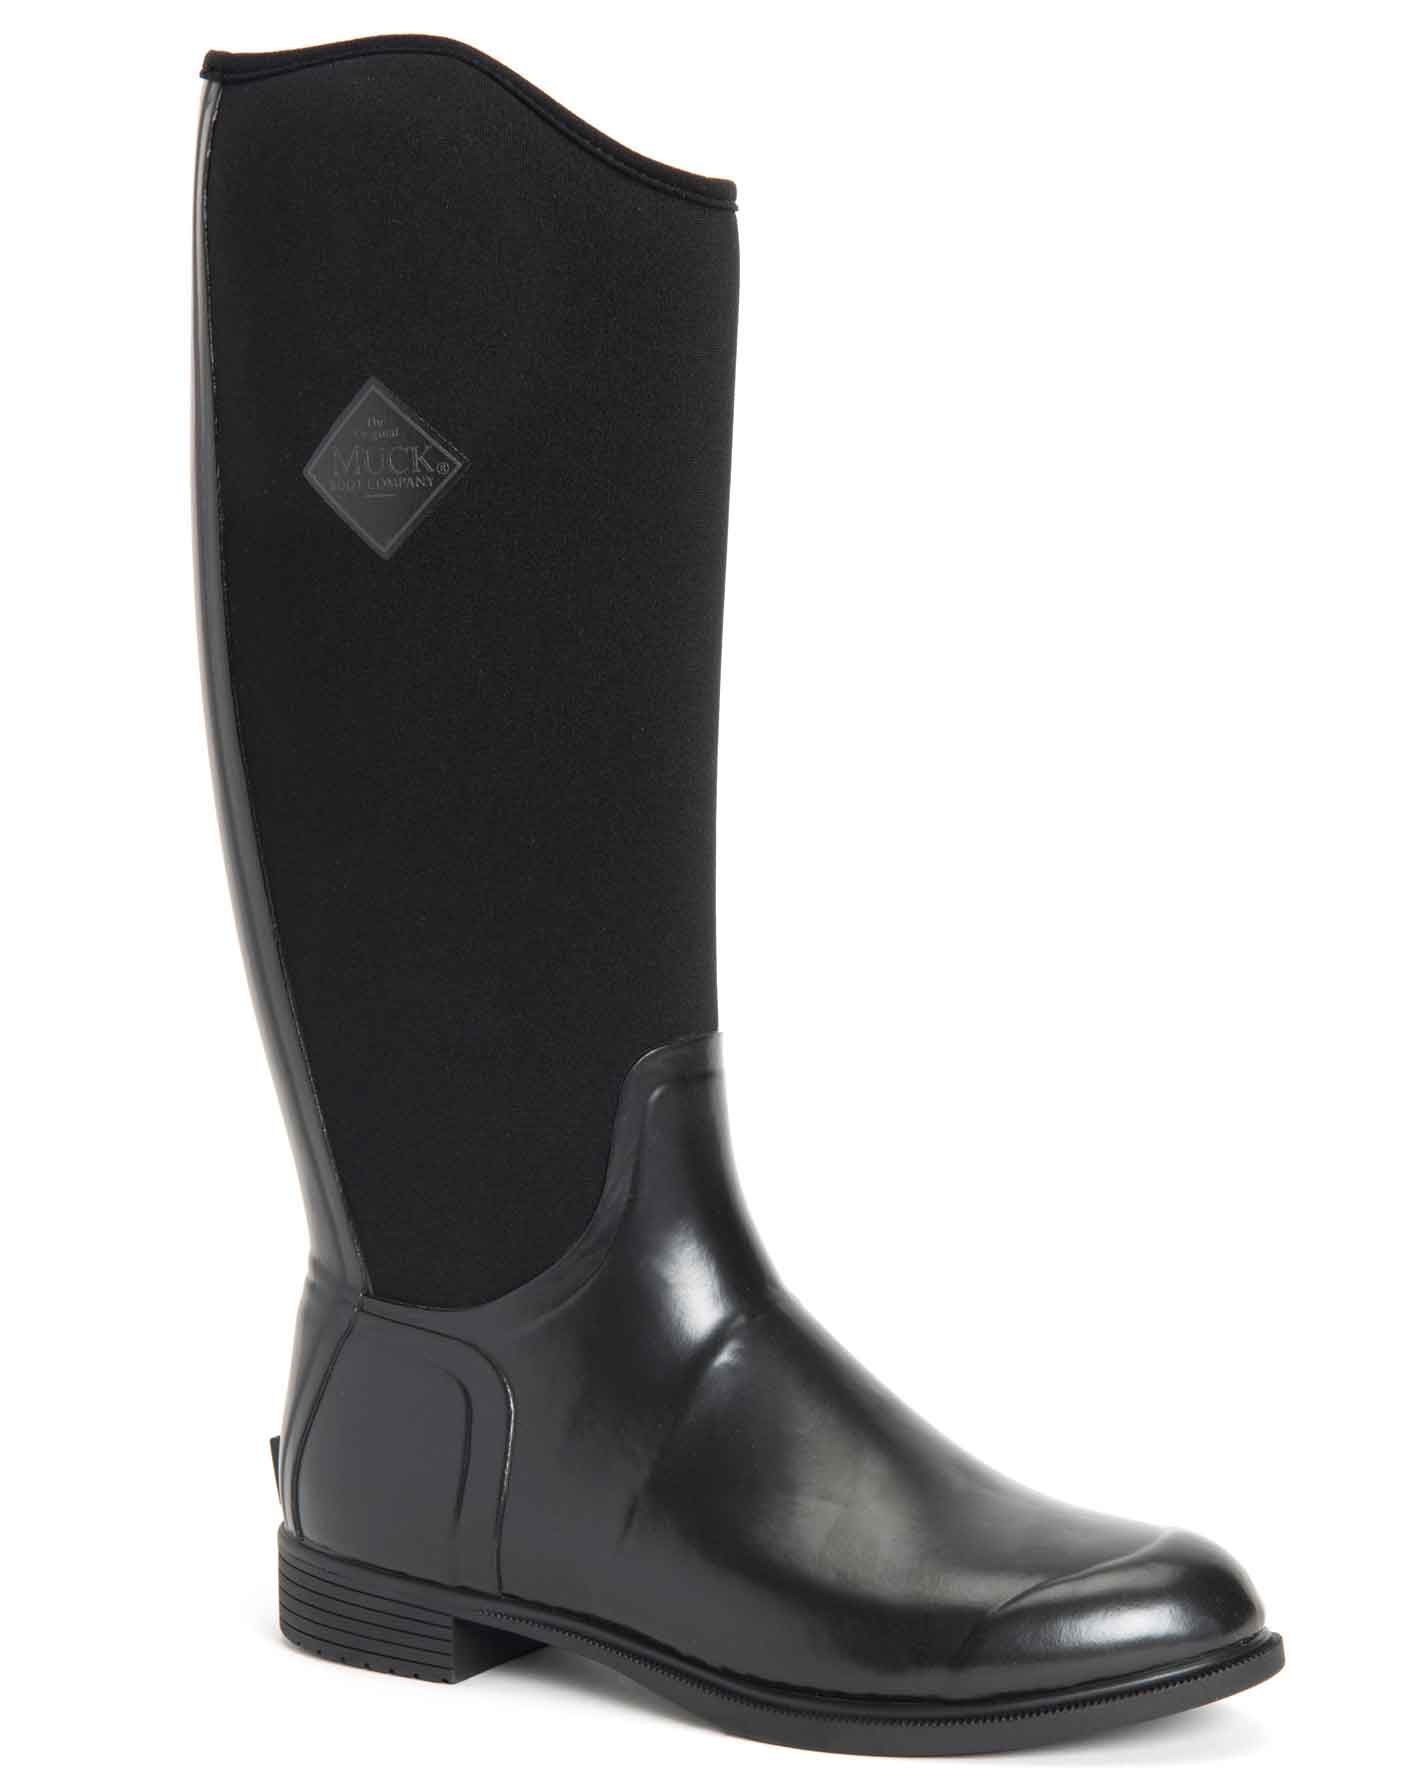 Derby Equestrian Tall Gumboots